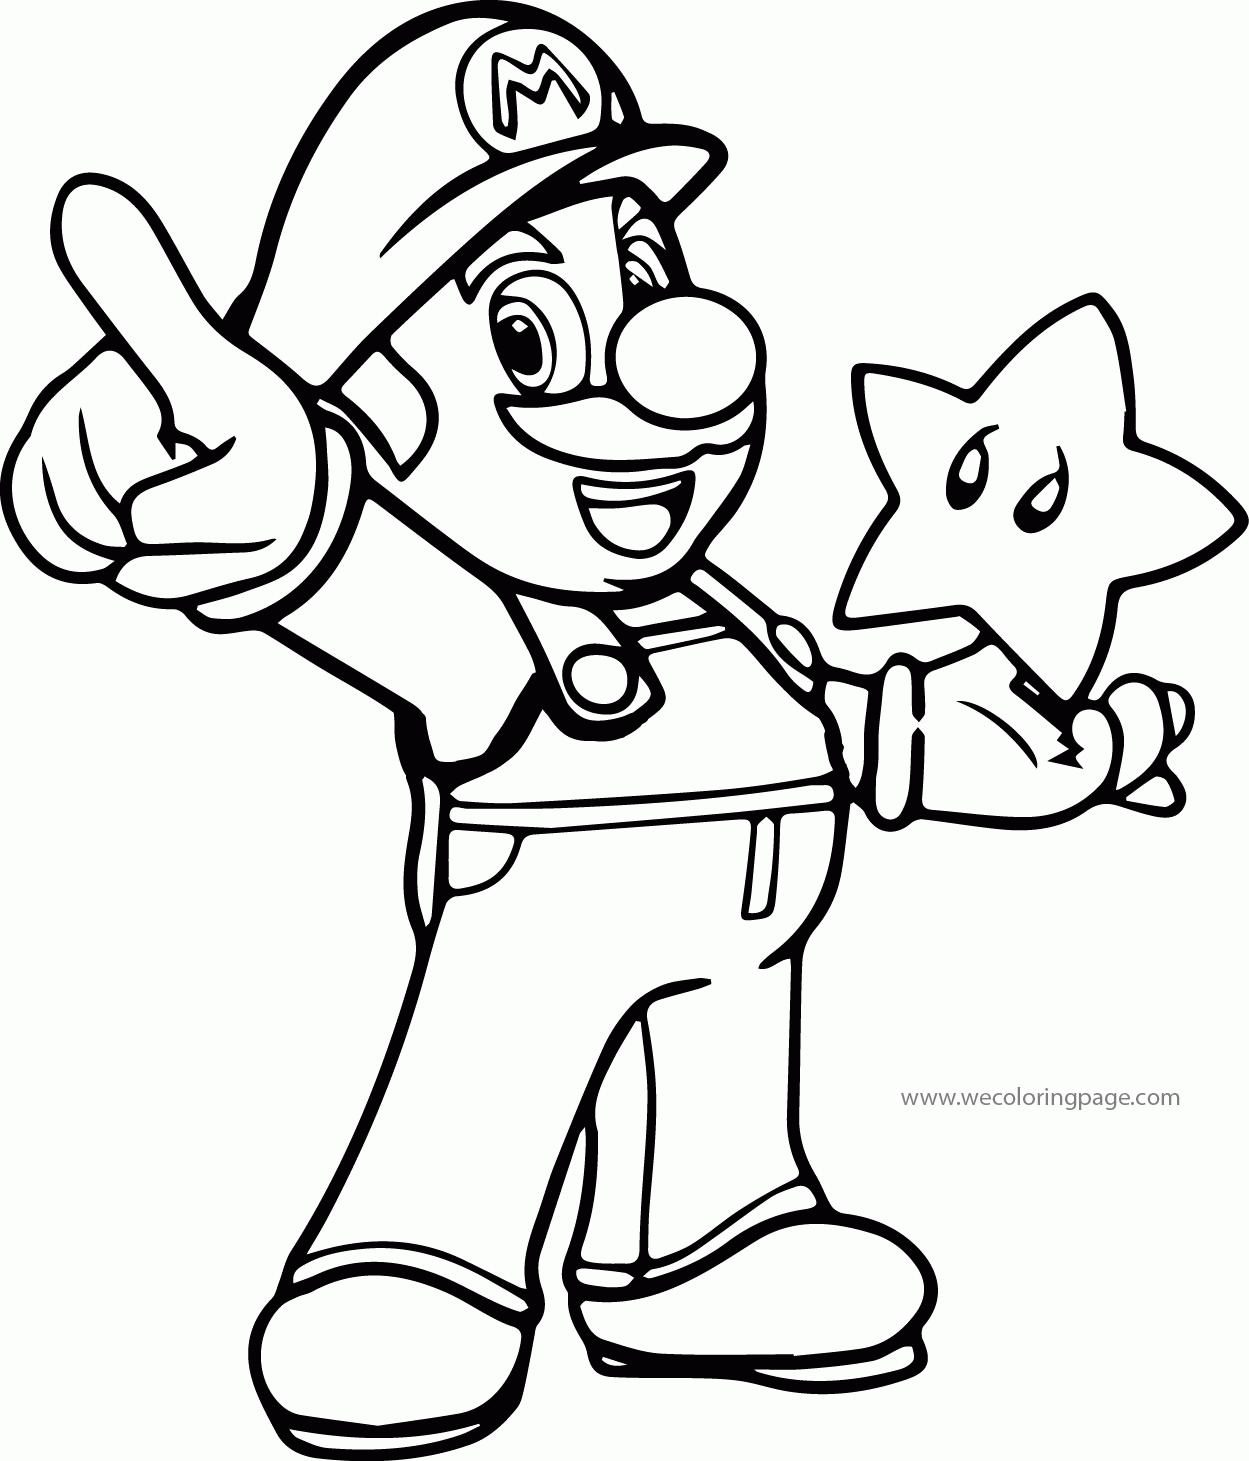 Super Mario Bowser Coloring Pages To Print Mario Coloring Pages